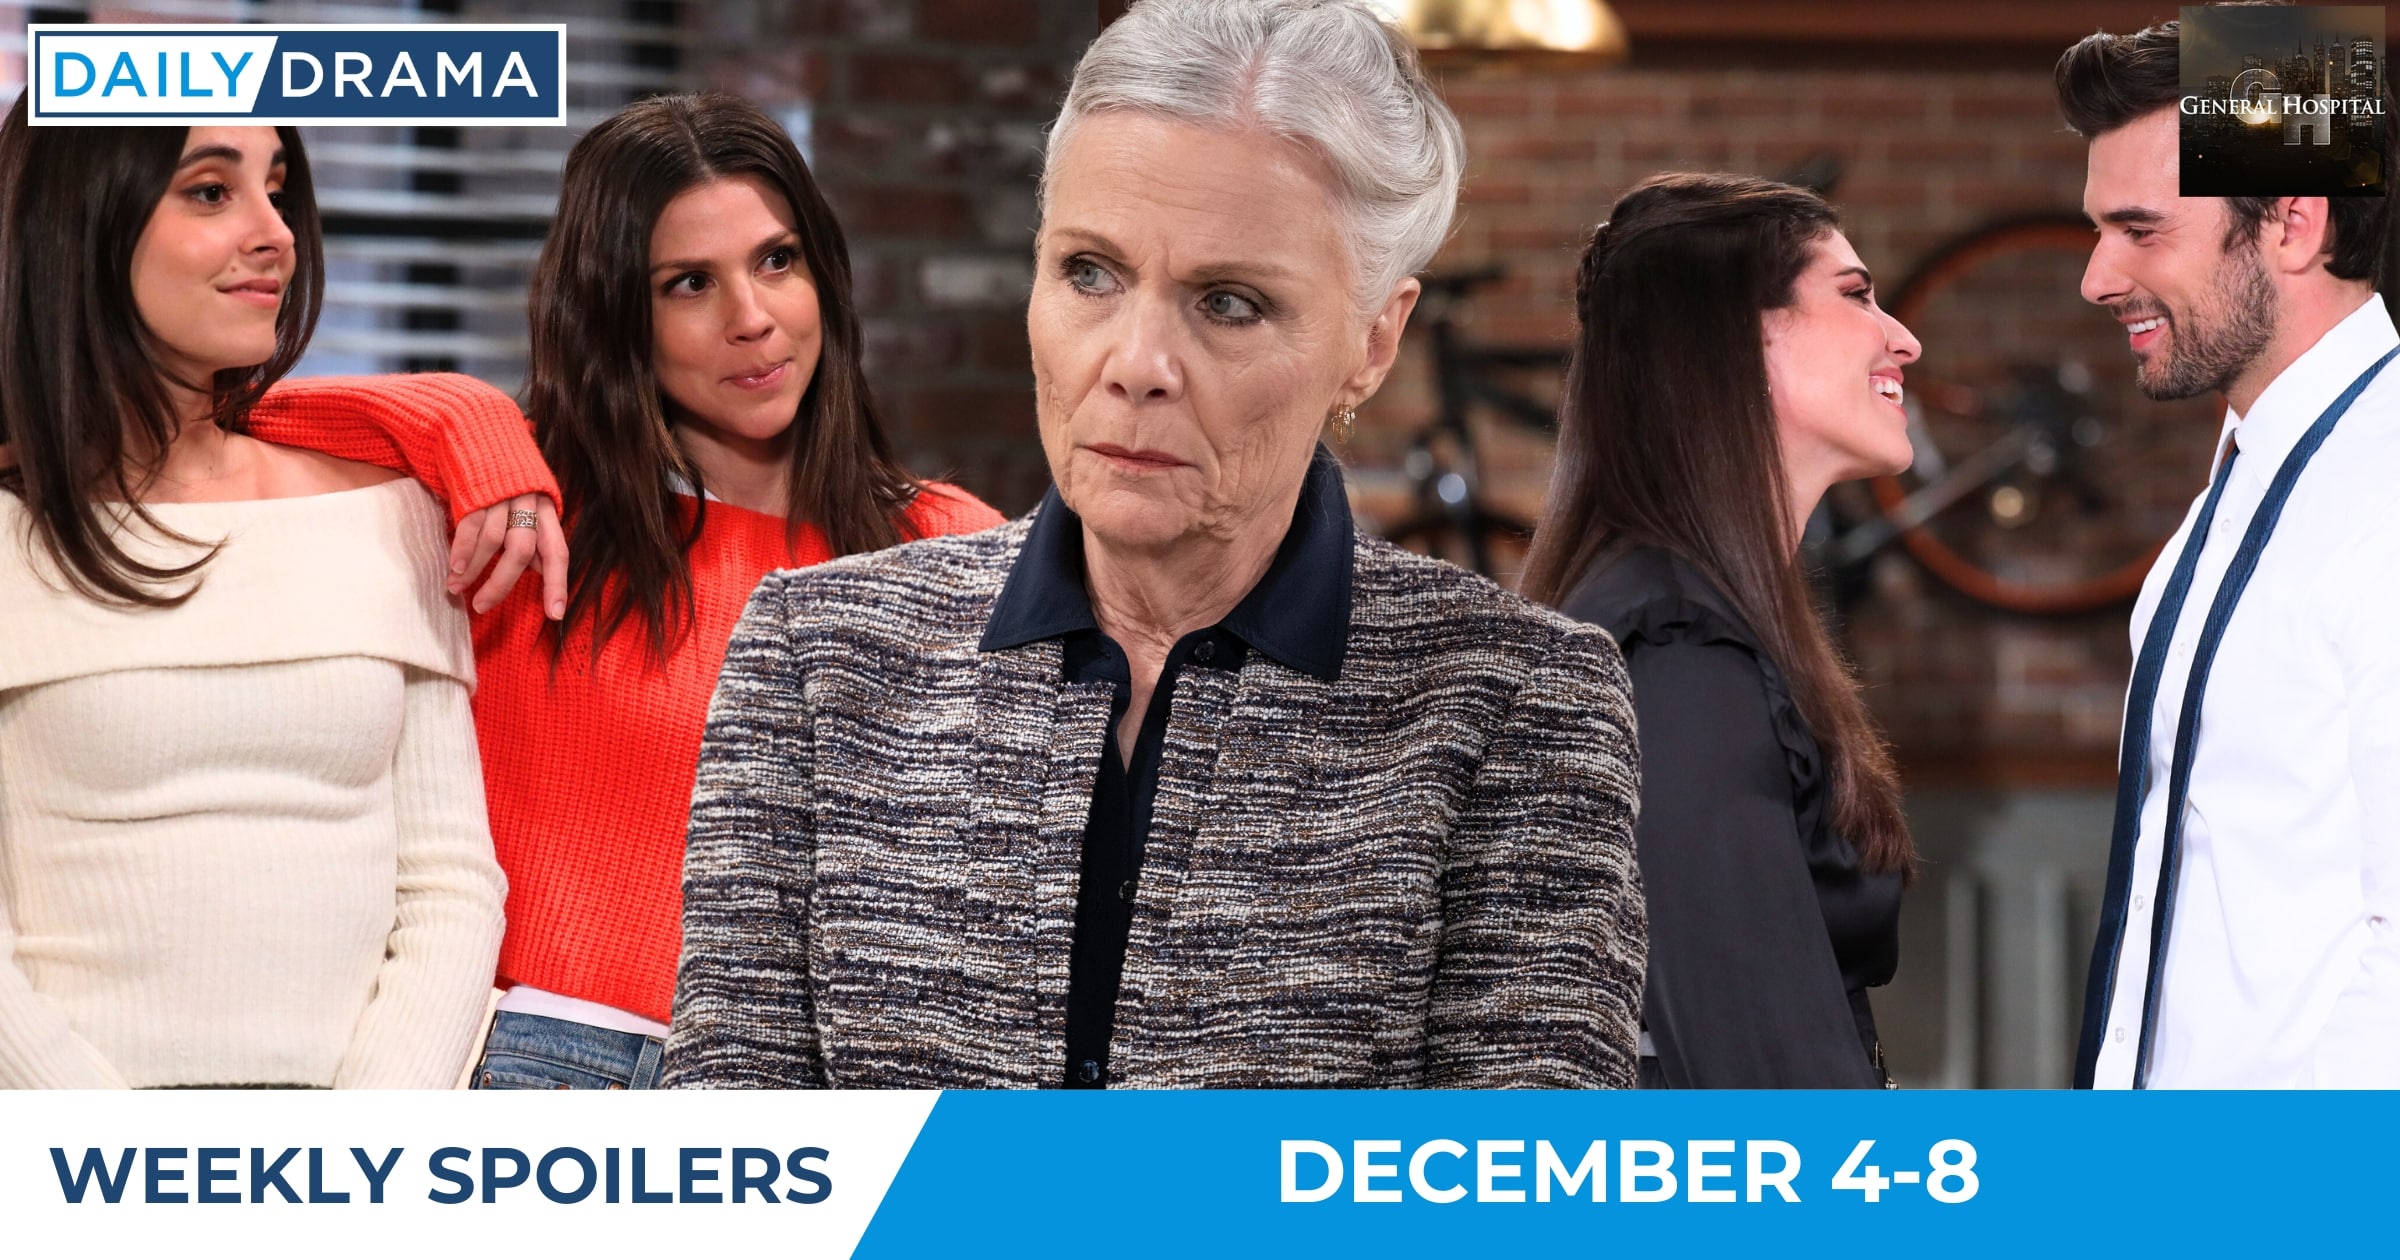 General Hospital Weekly Spoilers - Dec 4-8 - Molly Kristina Tracy Brook Lynn and Chase